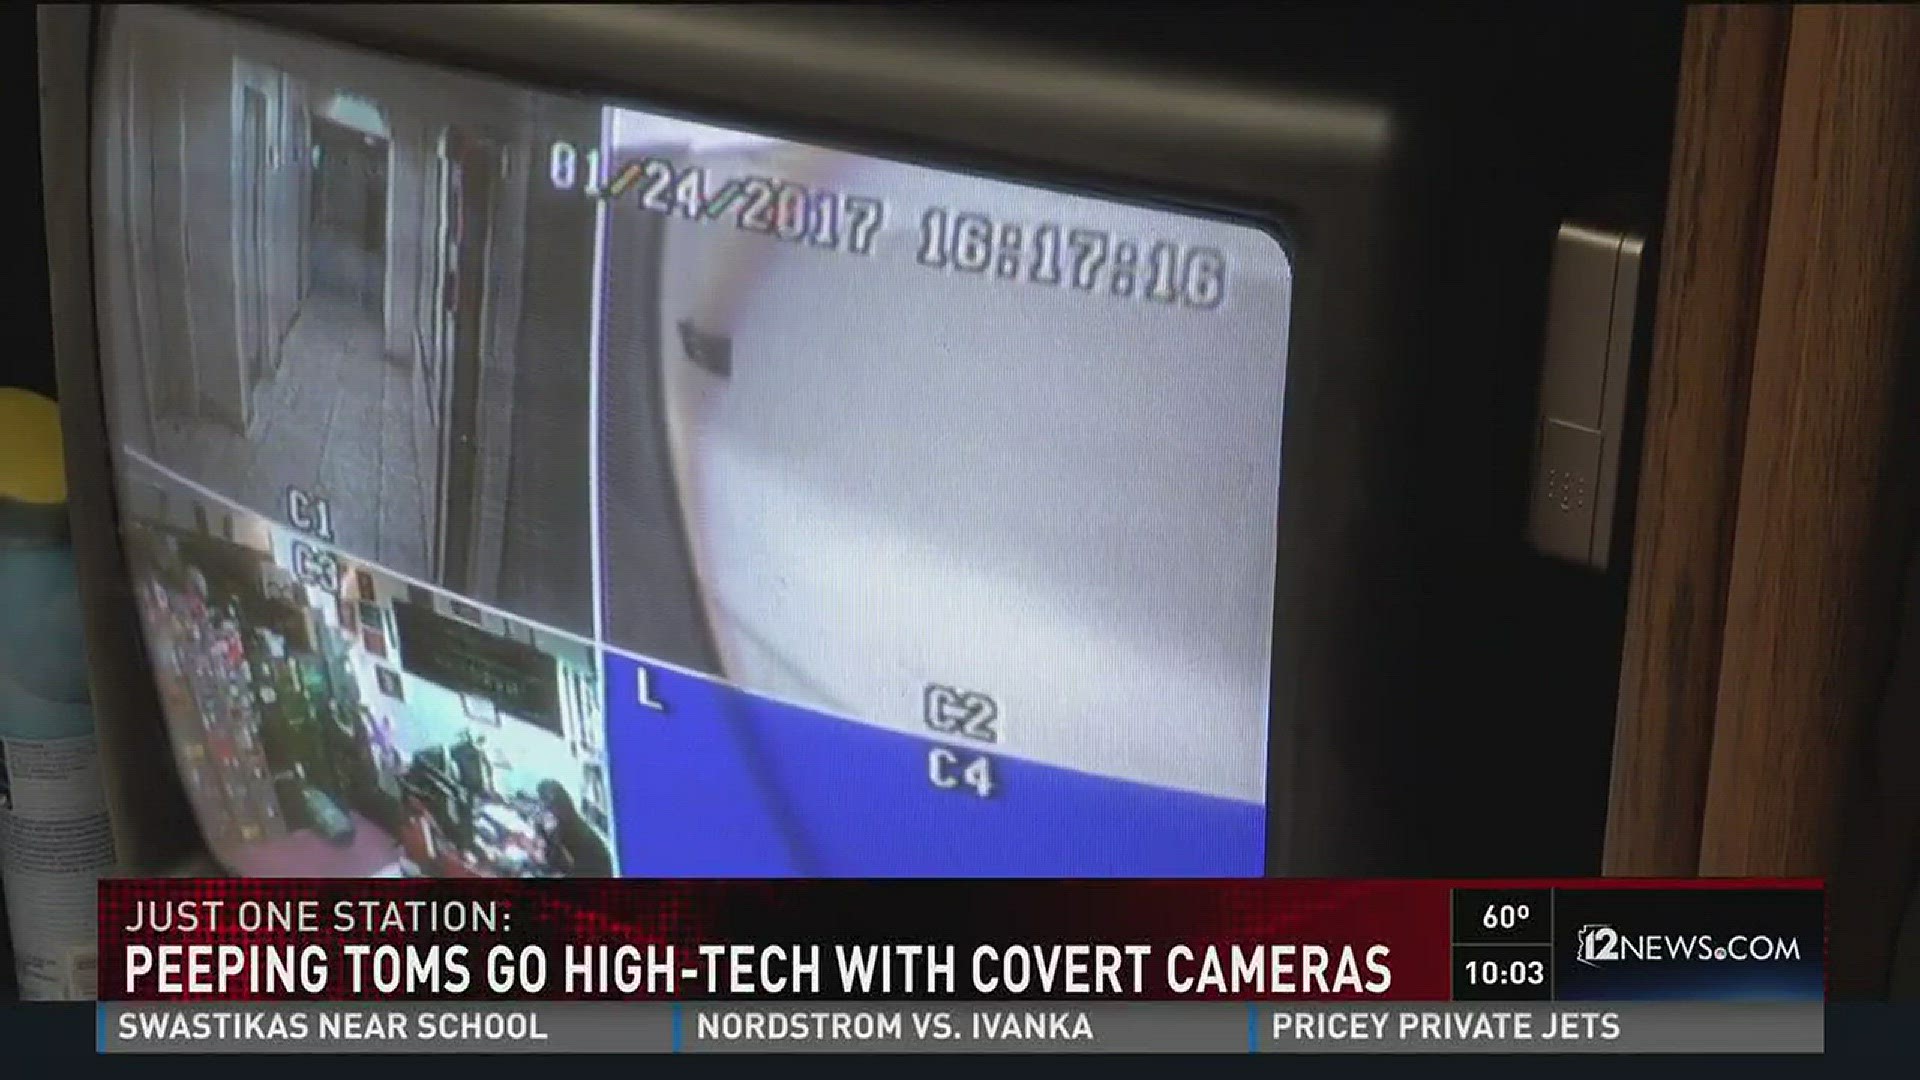 You would never know it was there Peeping Toms go high-tech with covert cameras 12news photo